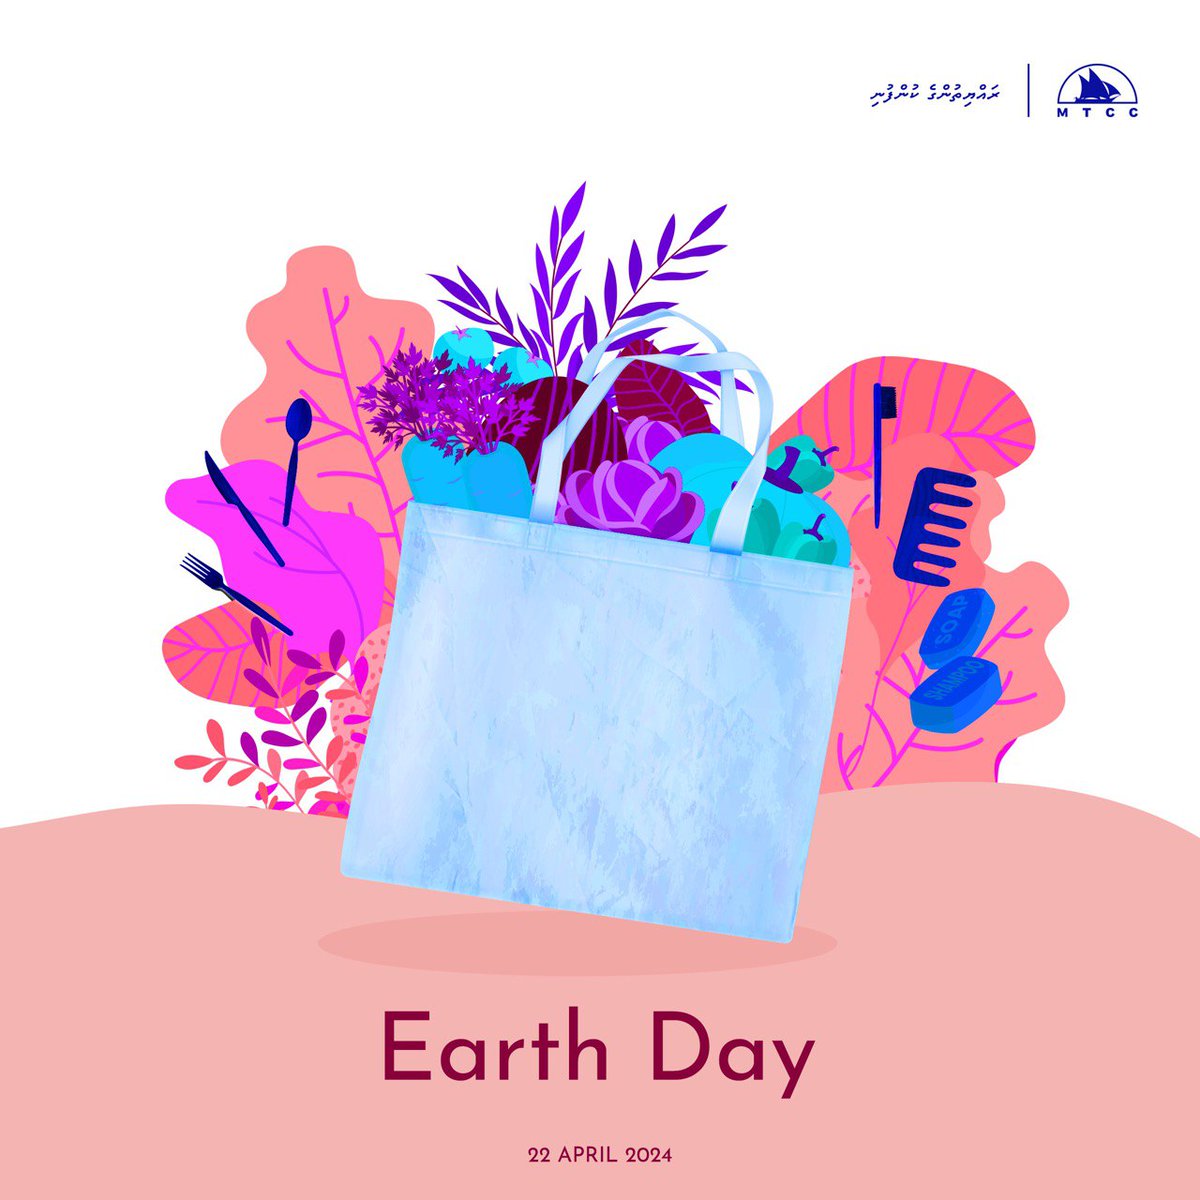 It's Earth Day! This year, the day advocates for widespread awareness on the health risk of plastics, rapidly phase out single use plastics, and urgently push for a strong UN Treaty on Plastic Pollution. #PlanetvsPlastics #EarthDay2024